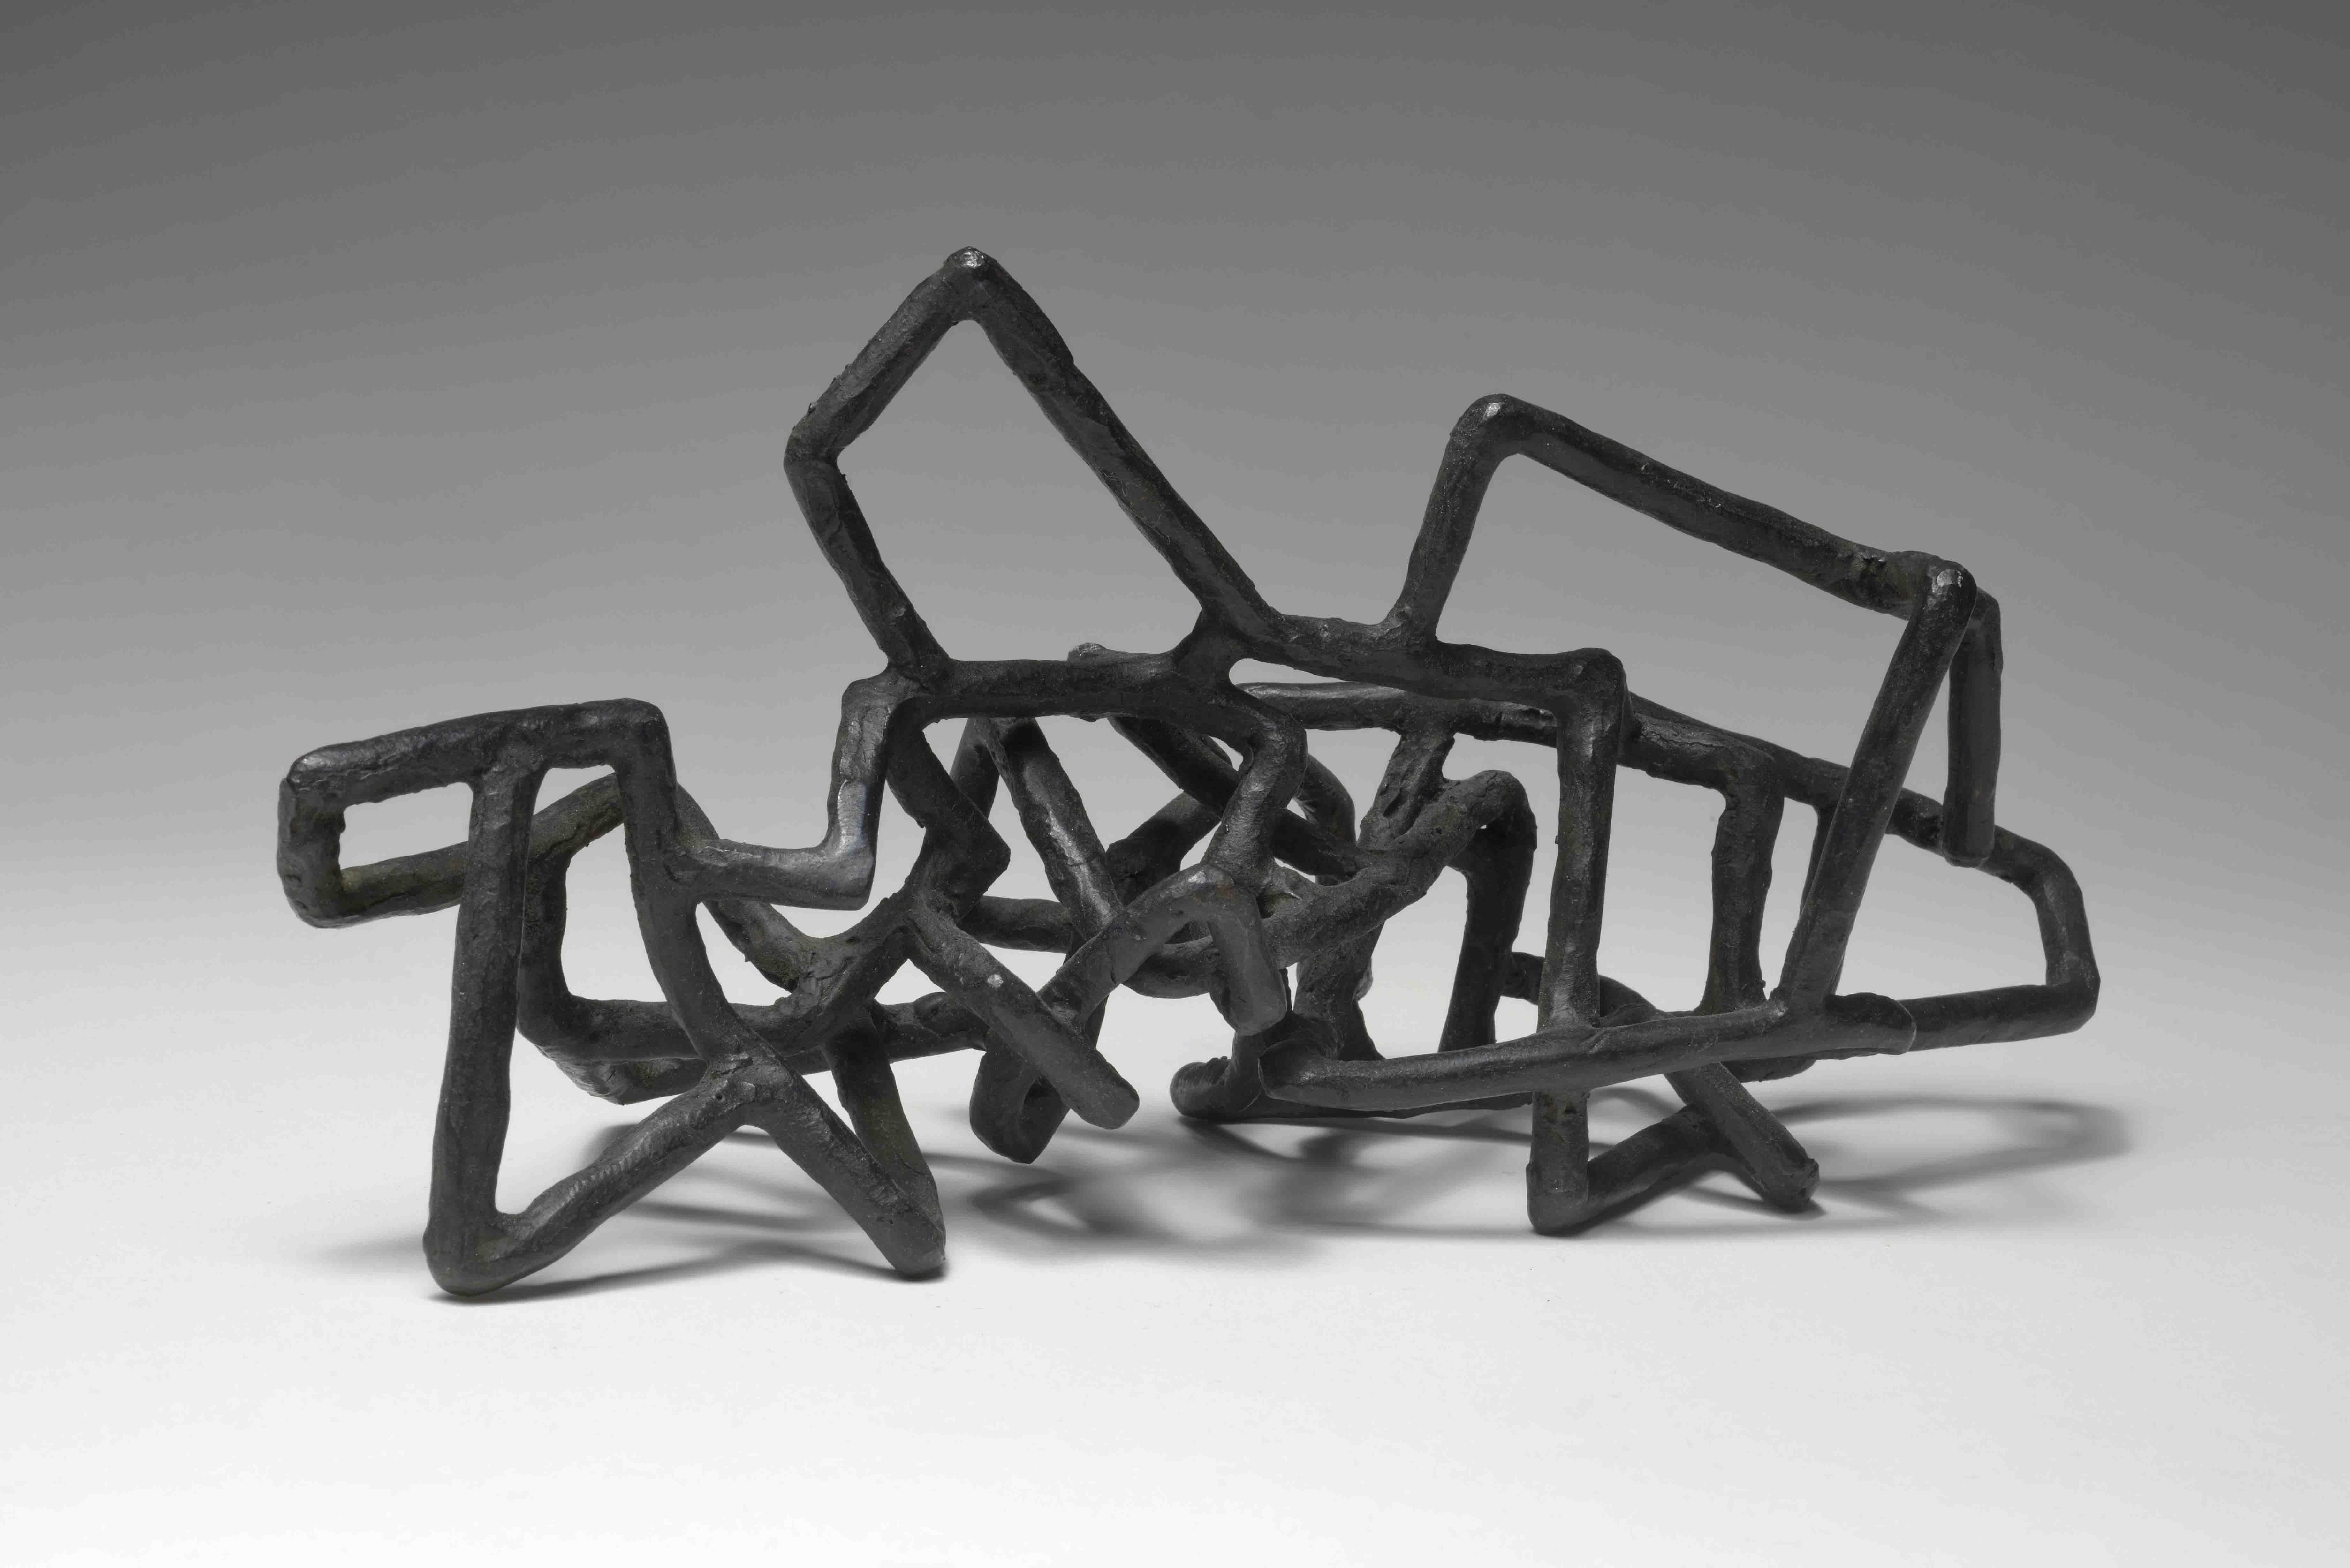 Zig Zag by Eric de Dormael, Galerie Negropontes in Paris, France. One of a kind sculpture in bronze

Éric de Dormael is an unconventional artist, his trajectory far from the beaten track. Trained at the Saint-Luc school in Tournai and at the Atelier